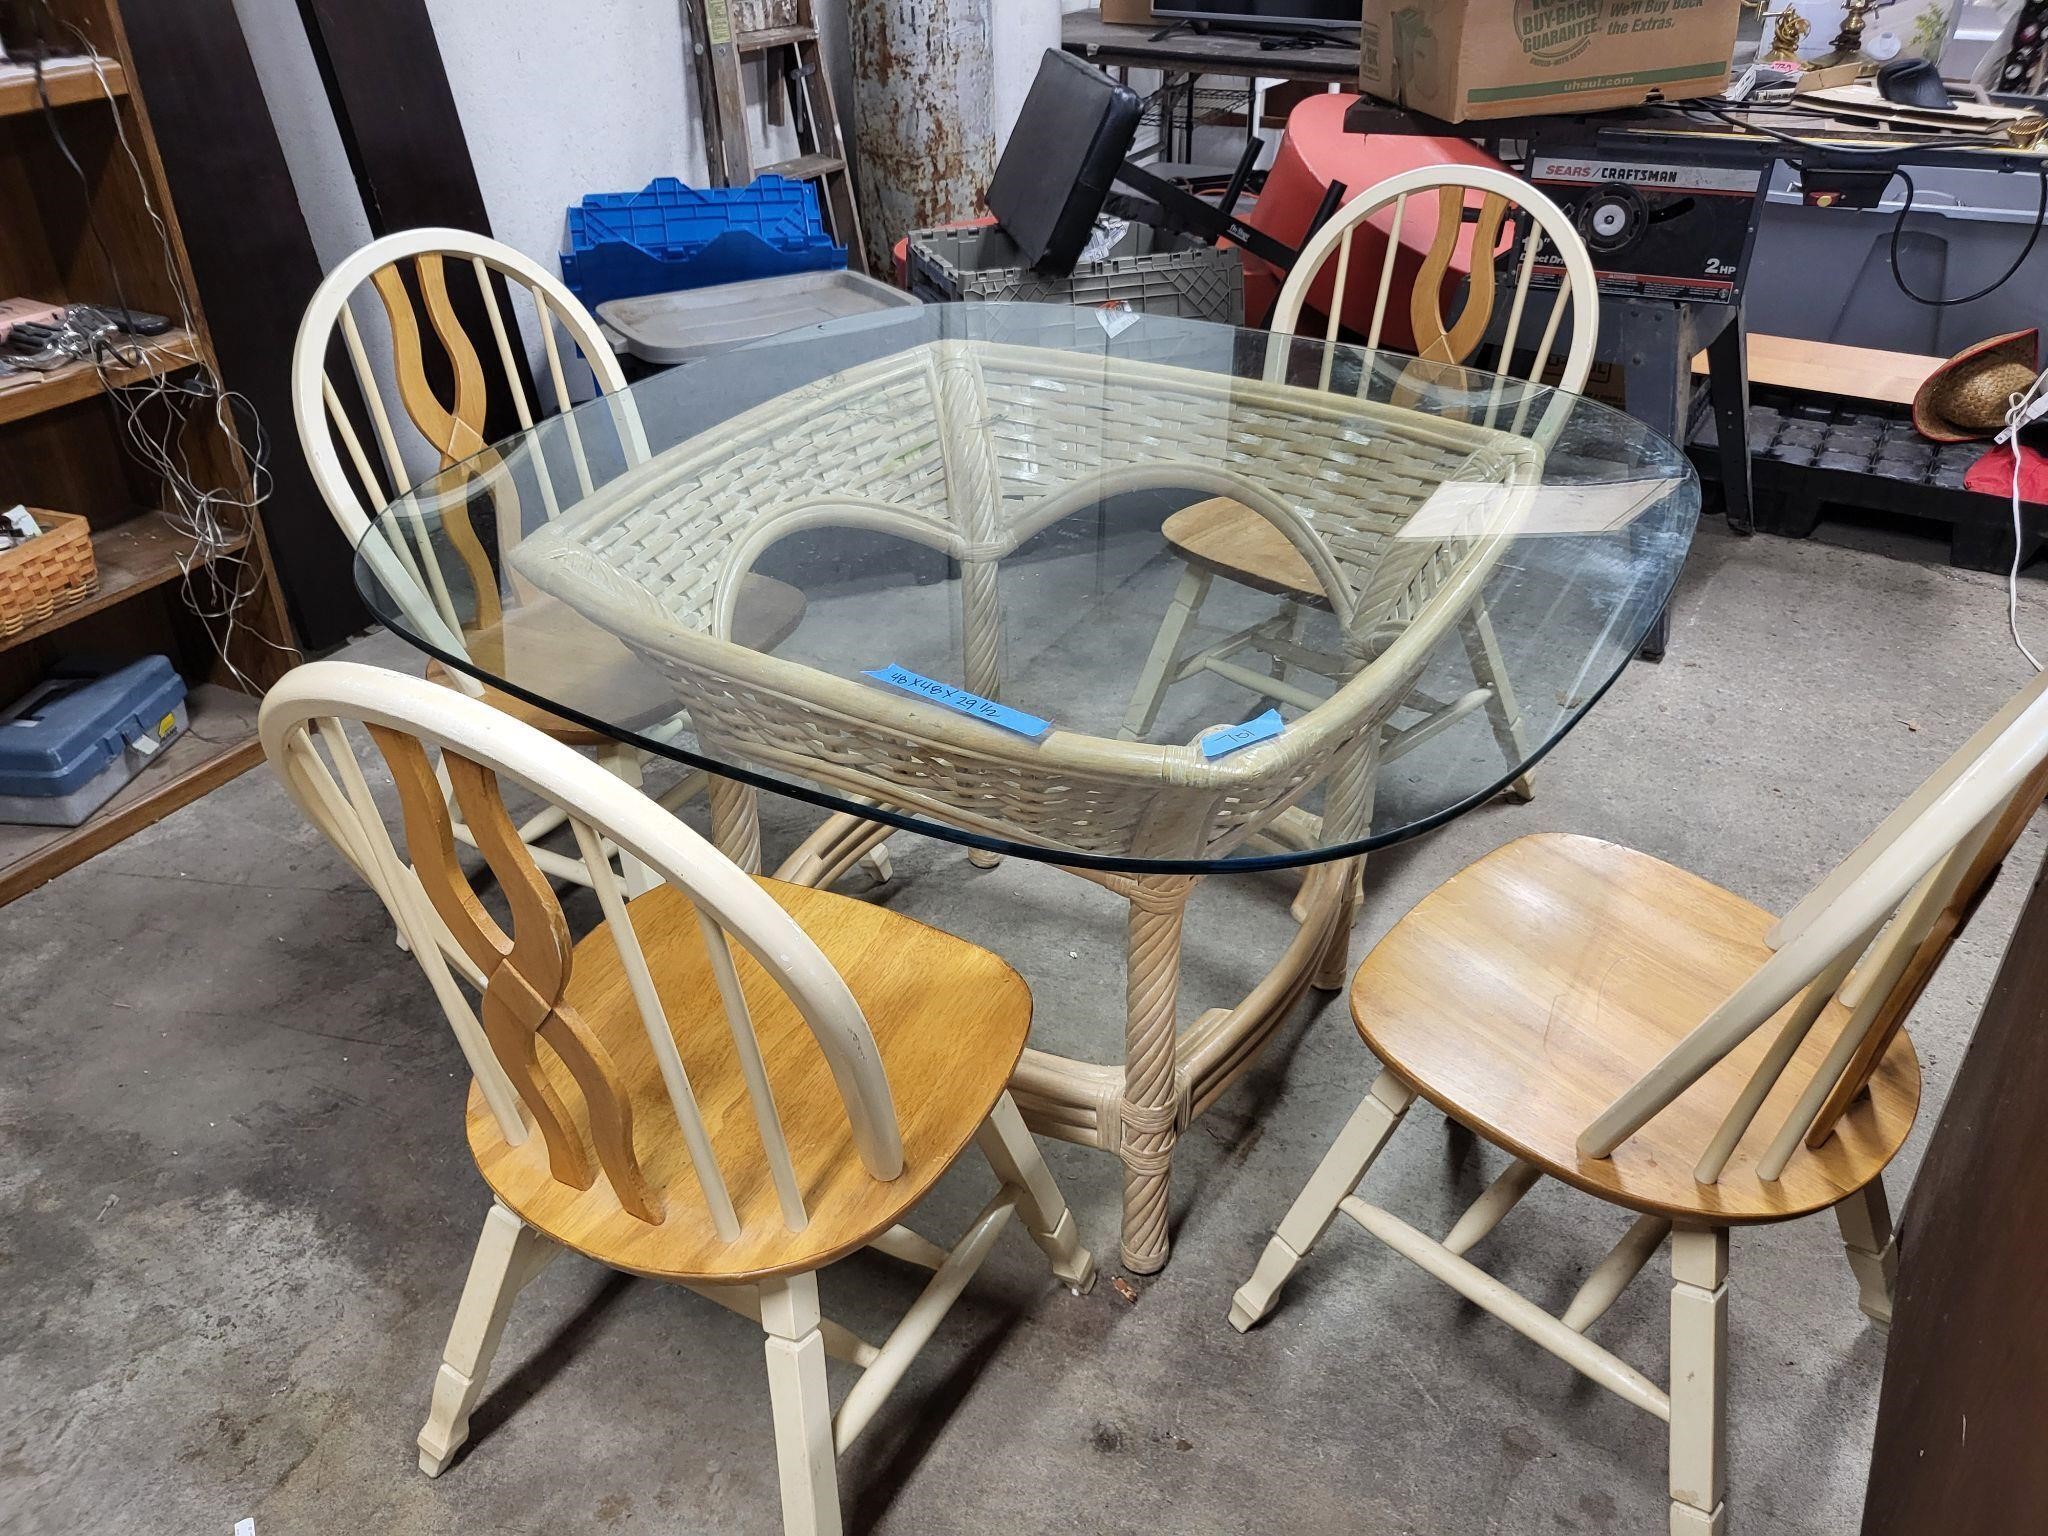 Glass top table and chairs